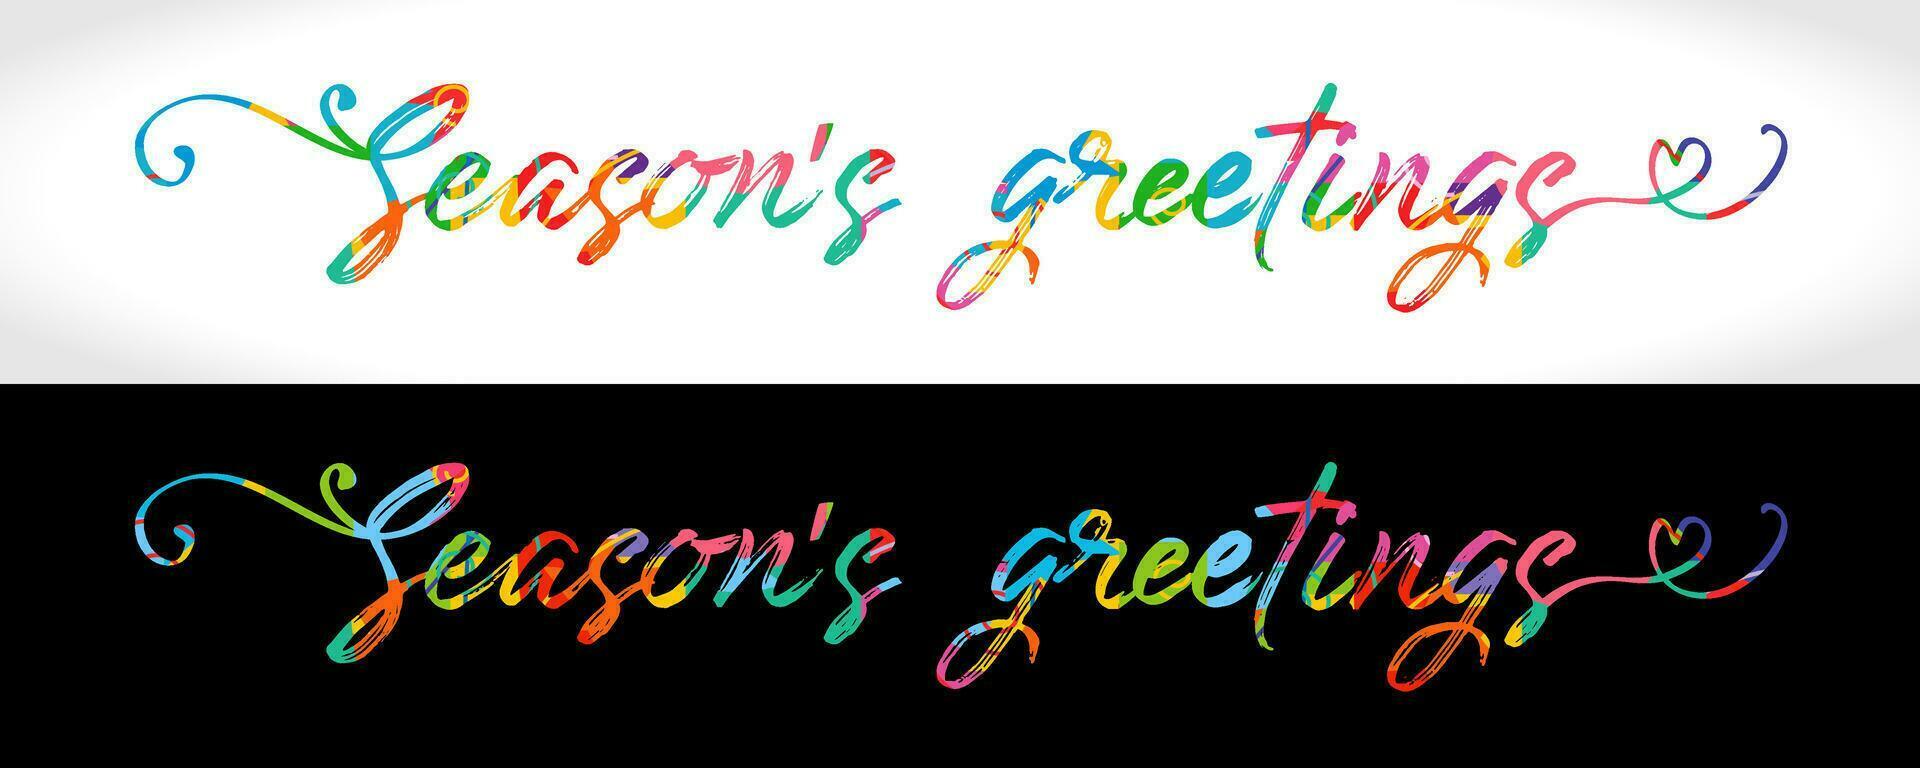 Creative colorful text Season's greetings, preview on white and black background. Horizontal logo or banner. Handdrawn style. Isolated typography. vector